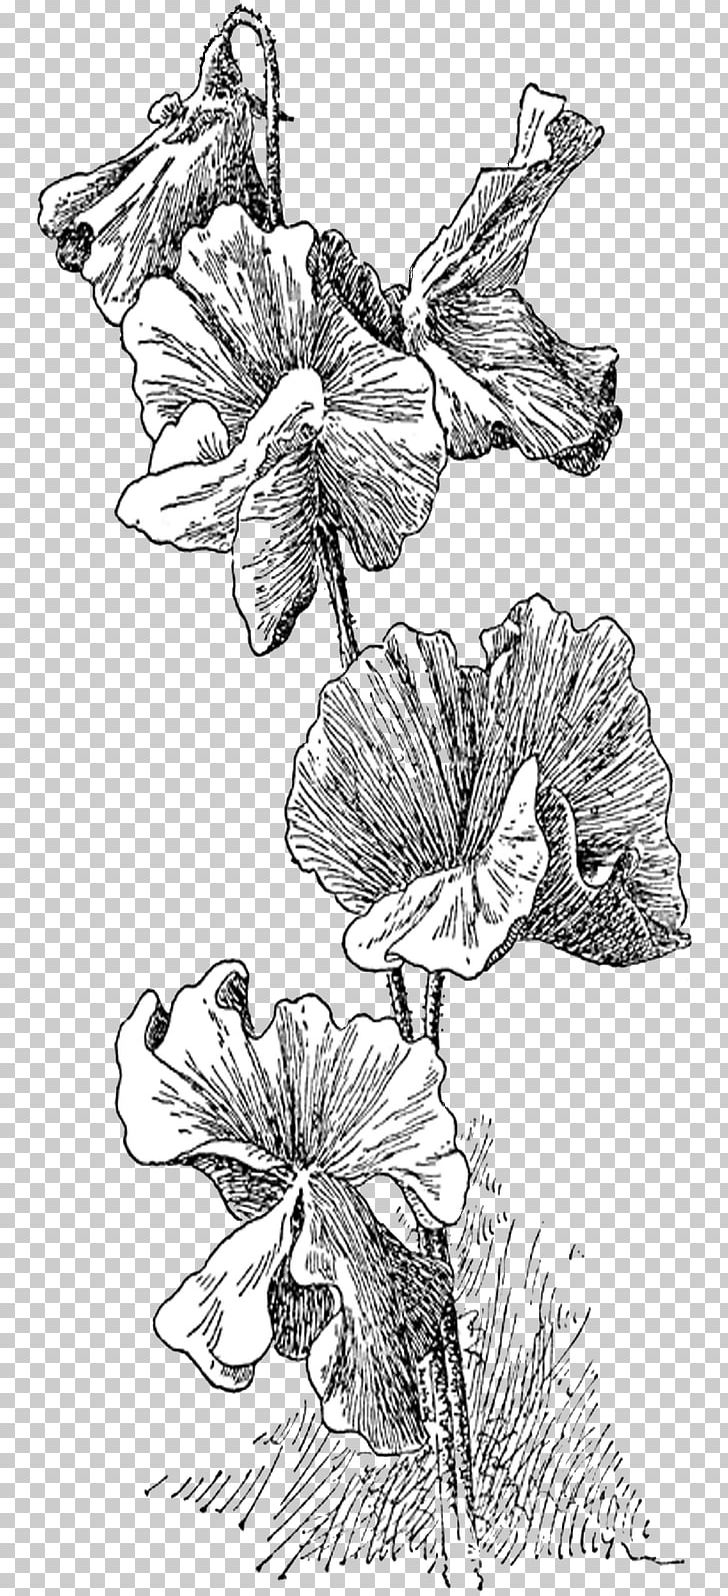 Sweet Pea Digital Stamp Drawing PNG, Clipart, Art, Artwork, Black And White, Branch, Cartoon Free PNG Download